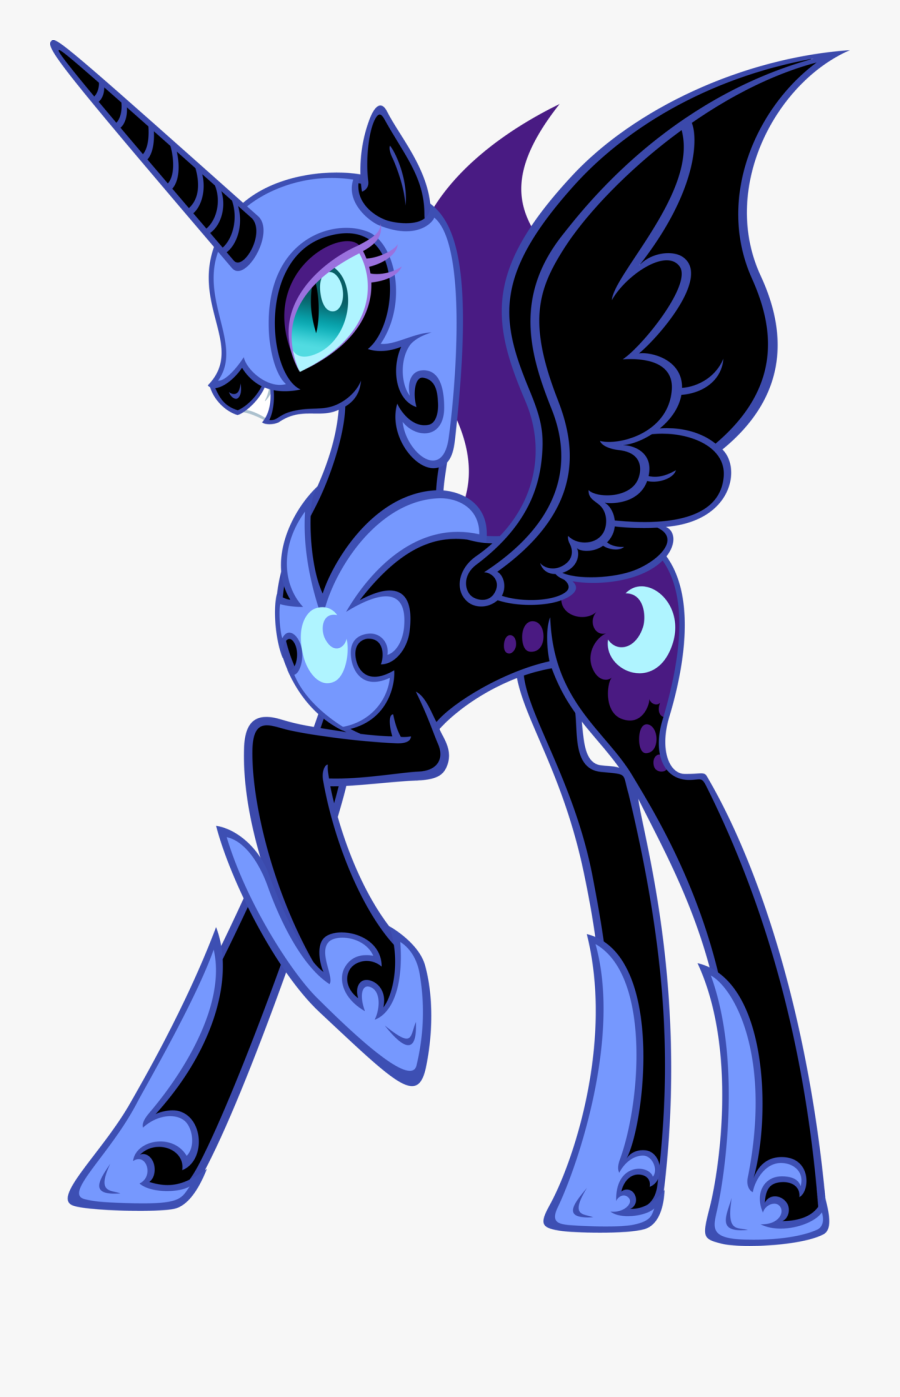 Lunar Clipart Small Moon - My Little Pony Nightmare Moon, Transparent Clipart